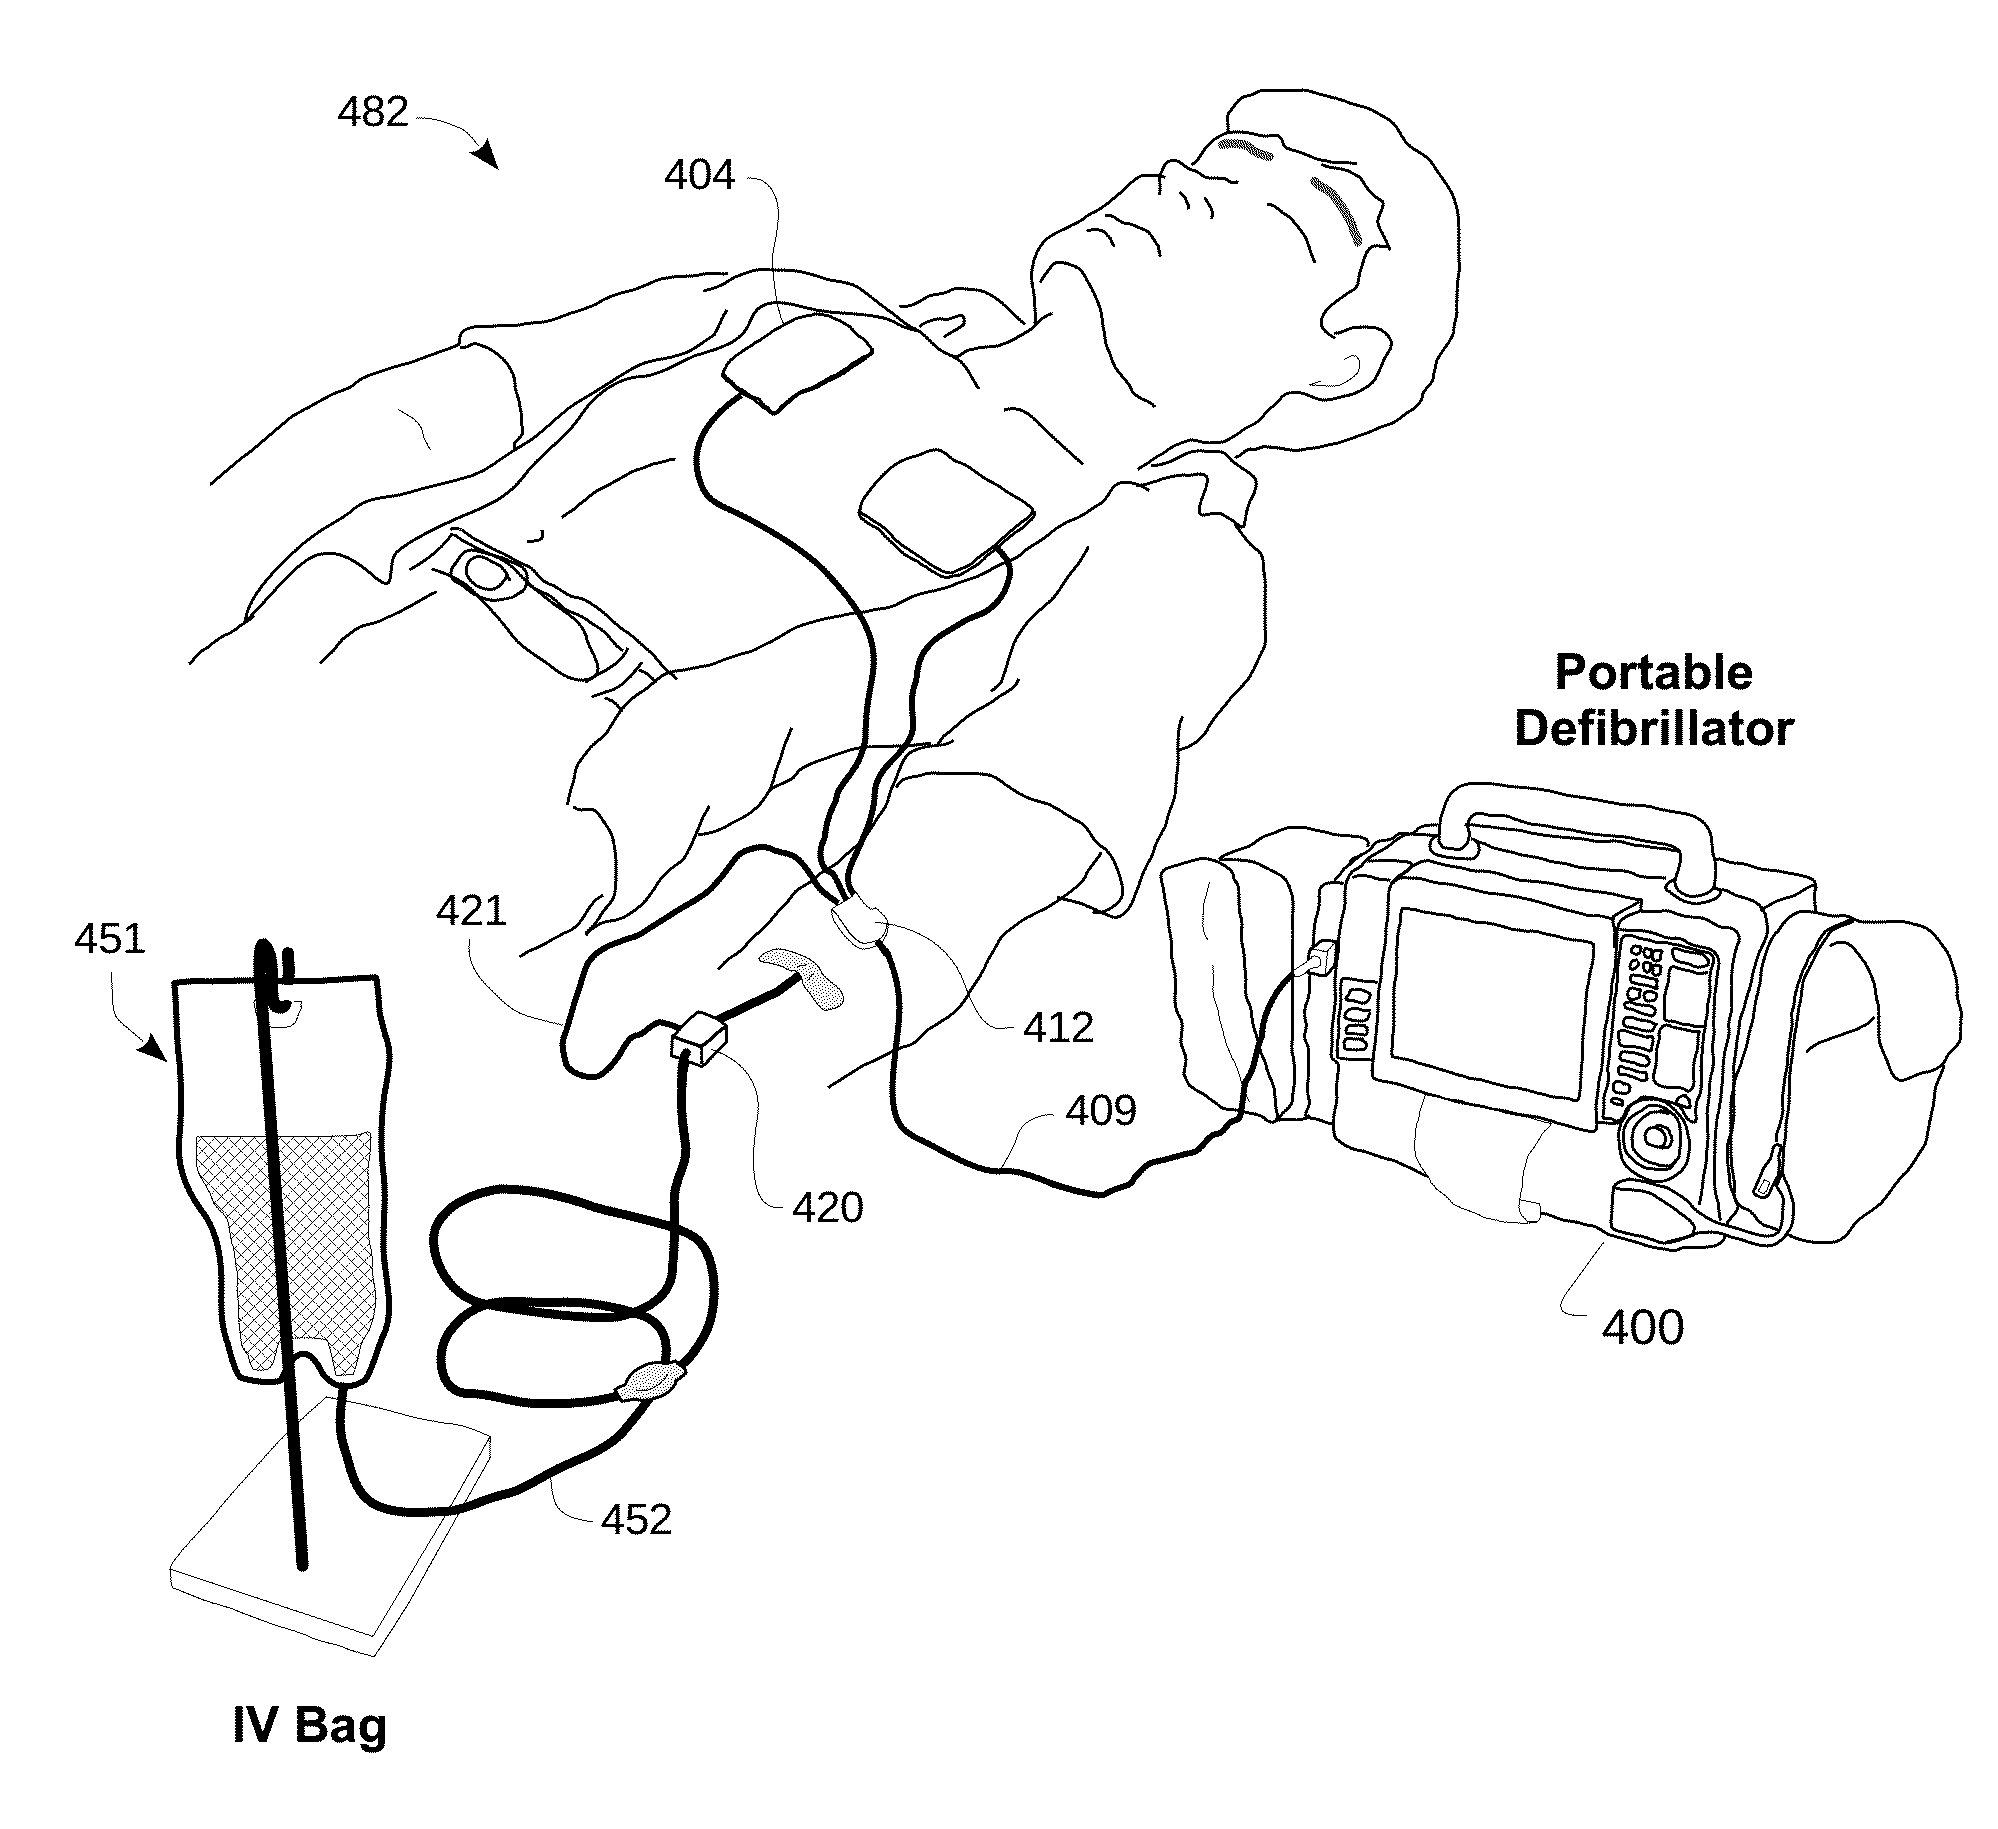 Intravenous line flow sensor for advanced diagnostics and monitoring in emergency medicine